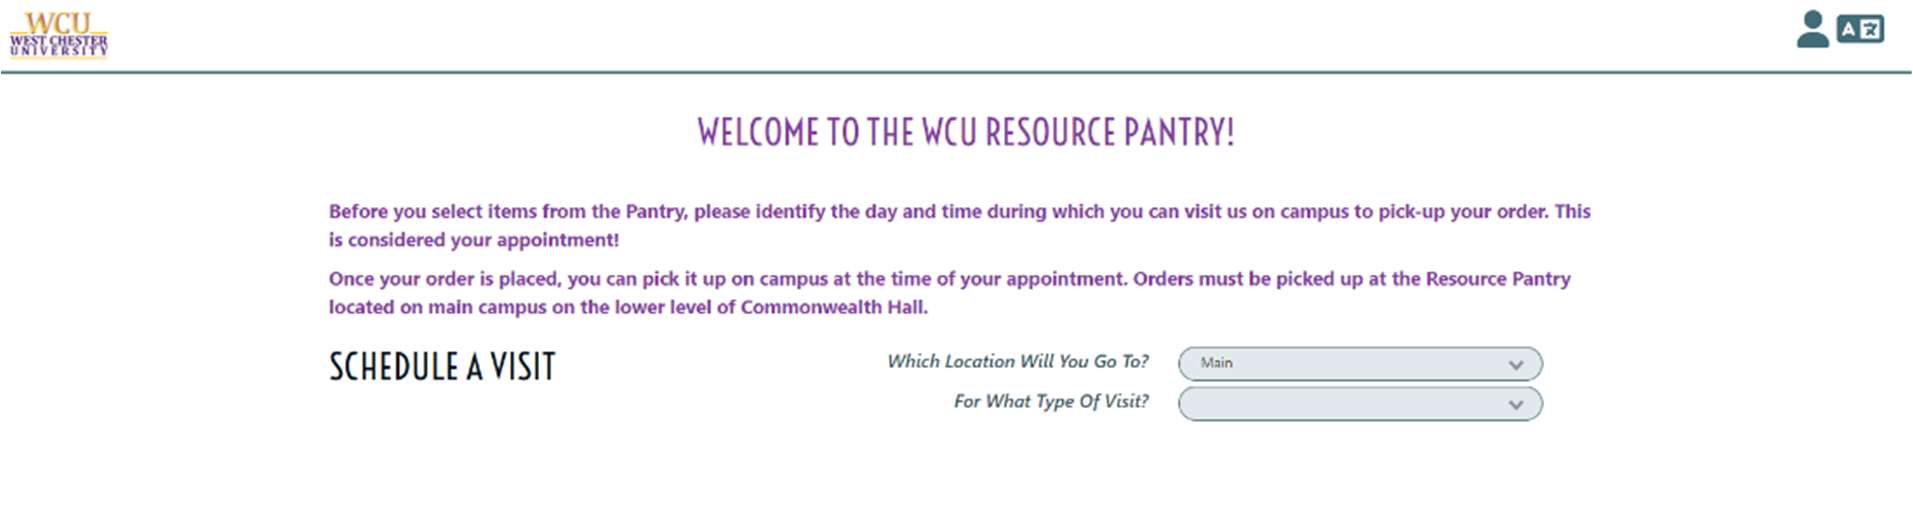 Screenshot of a webpage showing an appointment form. Text is: Welcome to the WCU Resources Pantry! Before you select items from the Pantry, please identify the day and time during which you can visit us on campus to pick-up your order. This is considered your appointment! Once your order is placed, you can pick it up on campus at the time of your appointment. Orders must be picked up at the Resource Pantry located on main campus on the lower level of Commonwealth Hall. Schedule a Visit: Which Location Will You Go To? For What Type Of Visit?